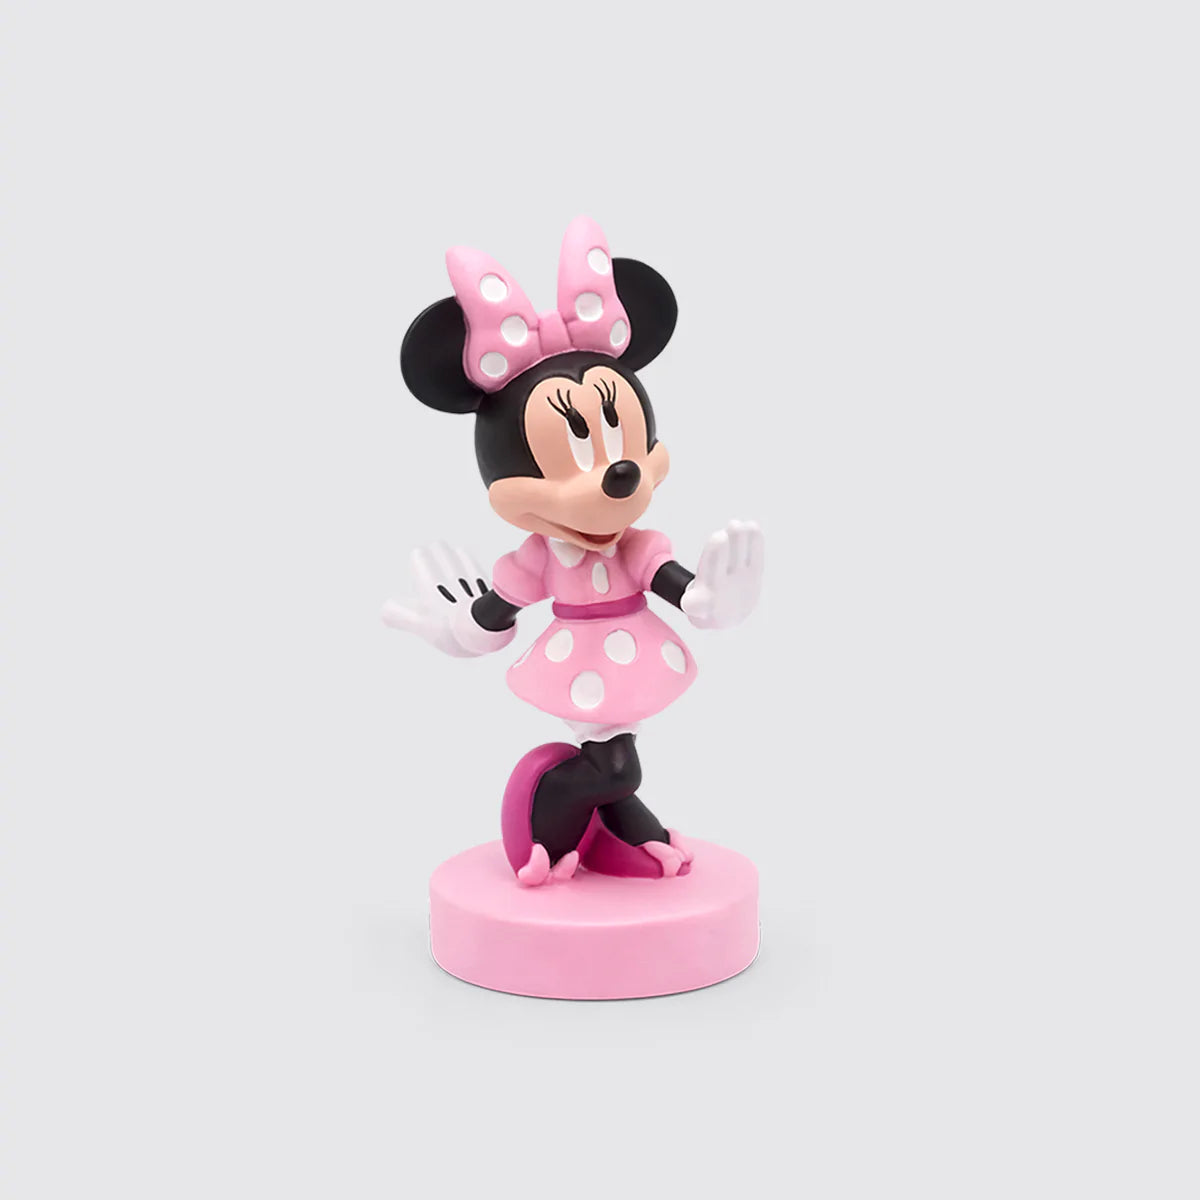 Tonies Minnie Mouse Audio Play Character from Disney